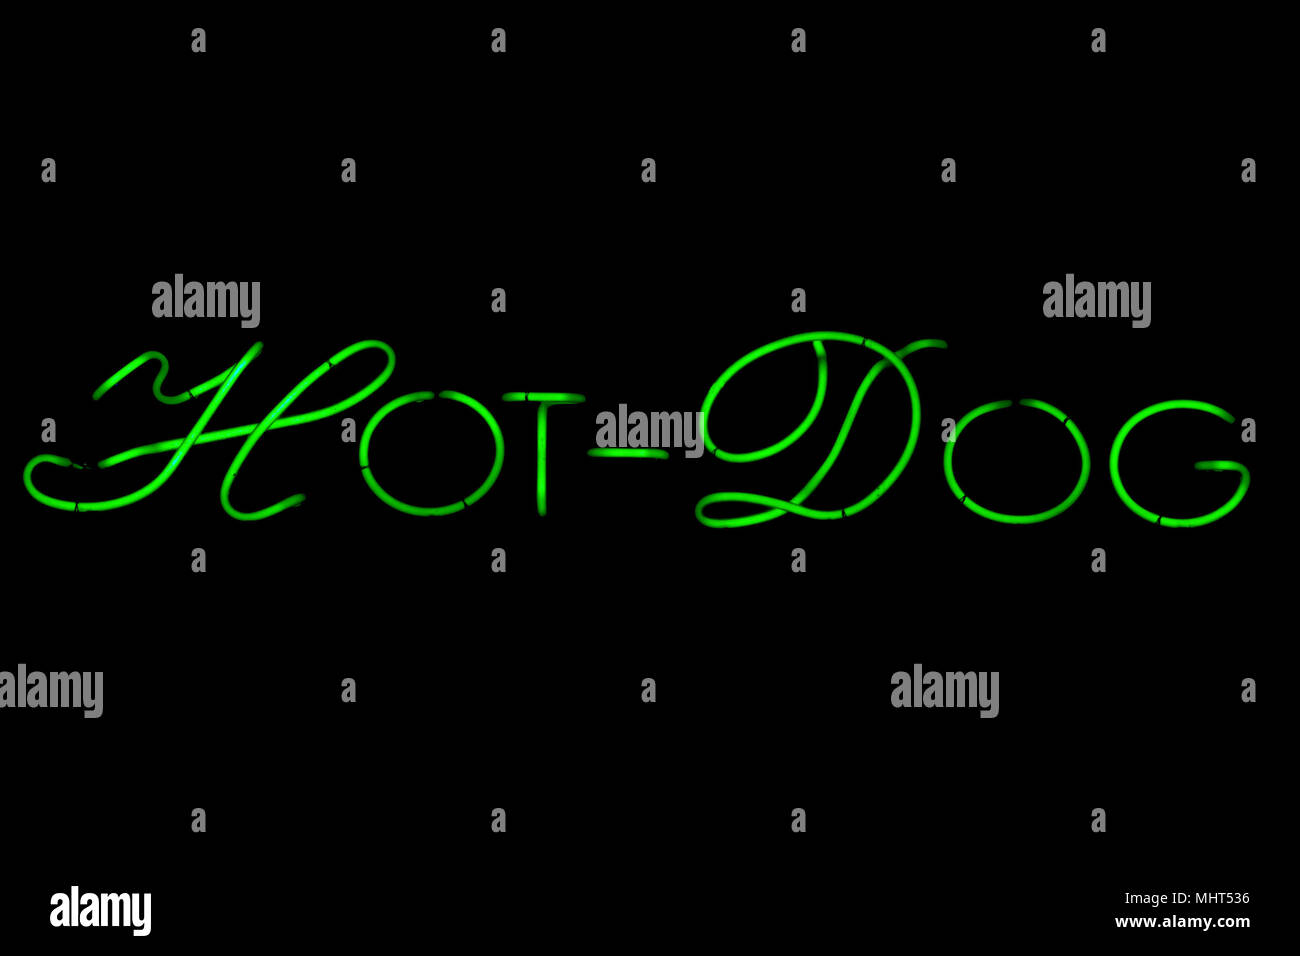 hot dog neon green sign isolated on black background Stock Photo